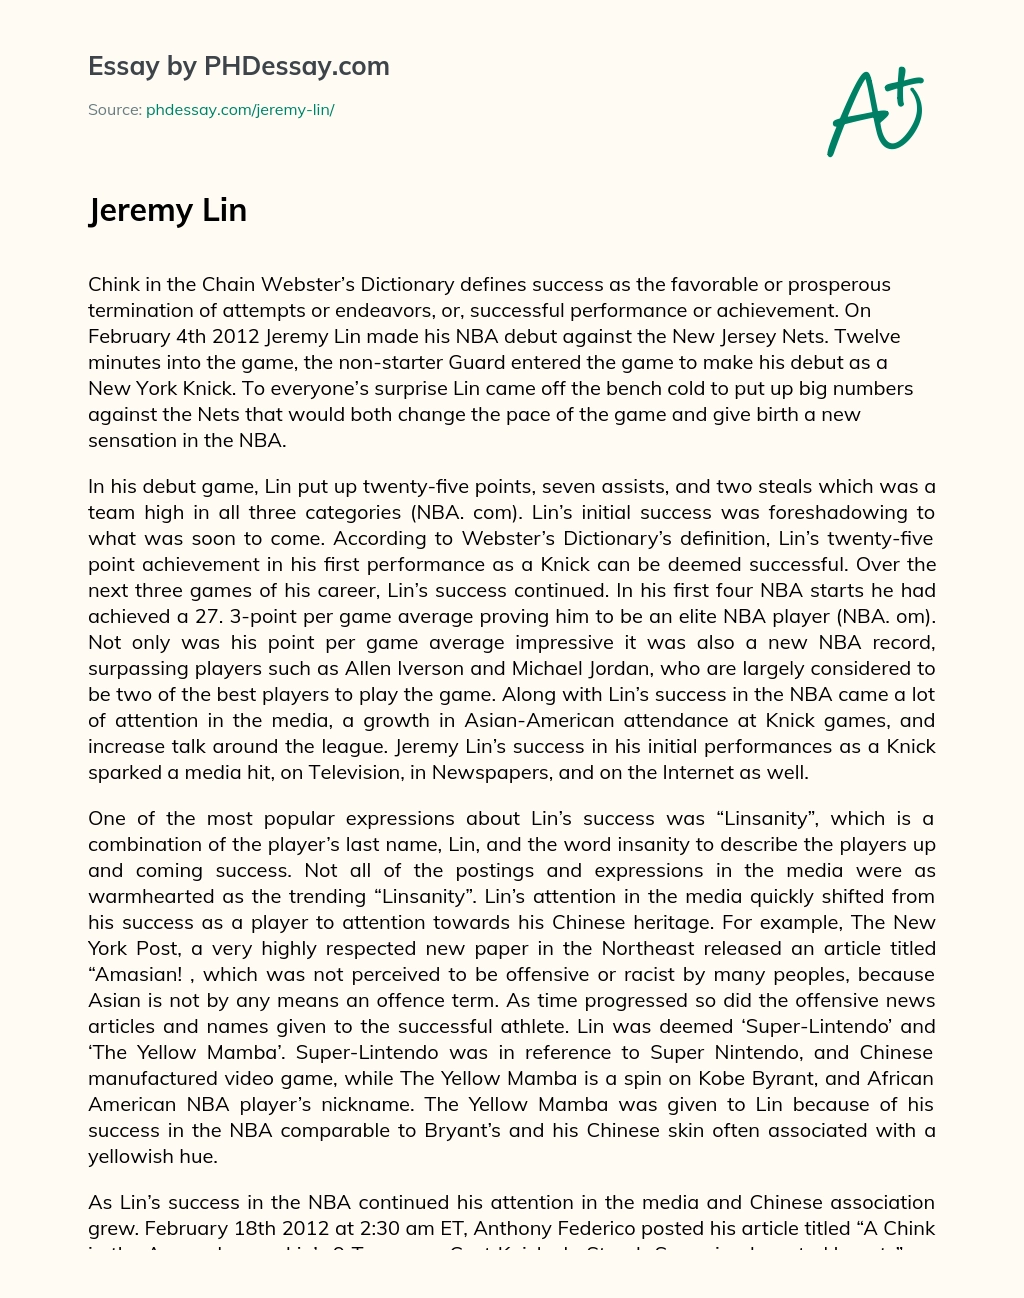 Jeremy Lin’s Initial Success in the NBA essay